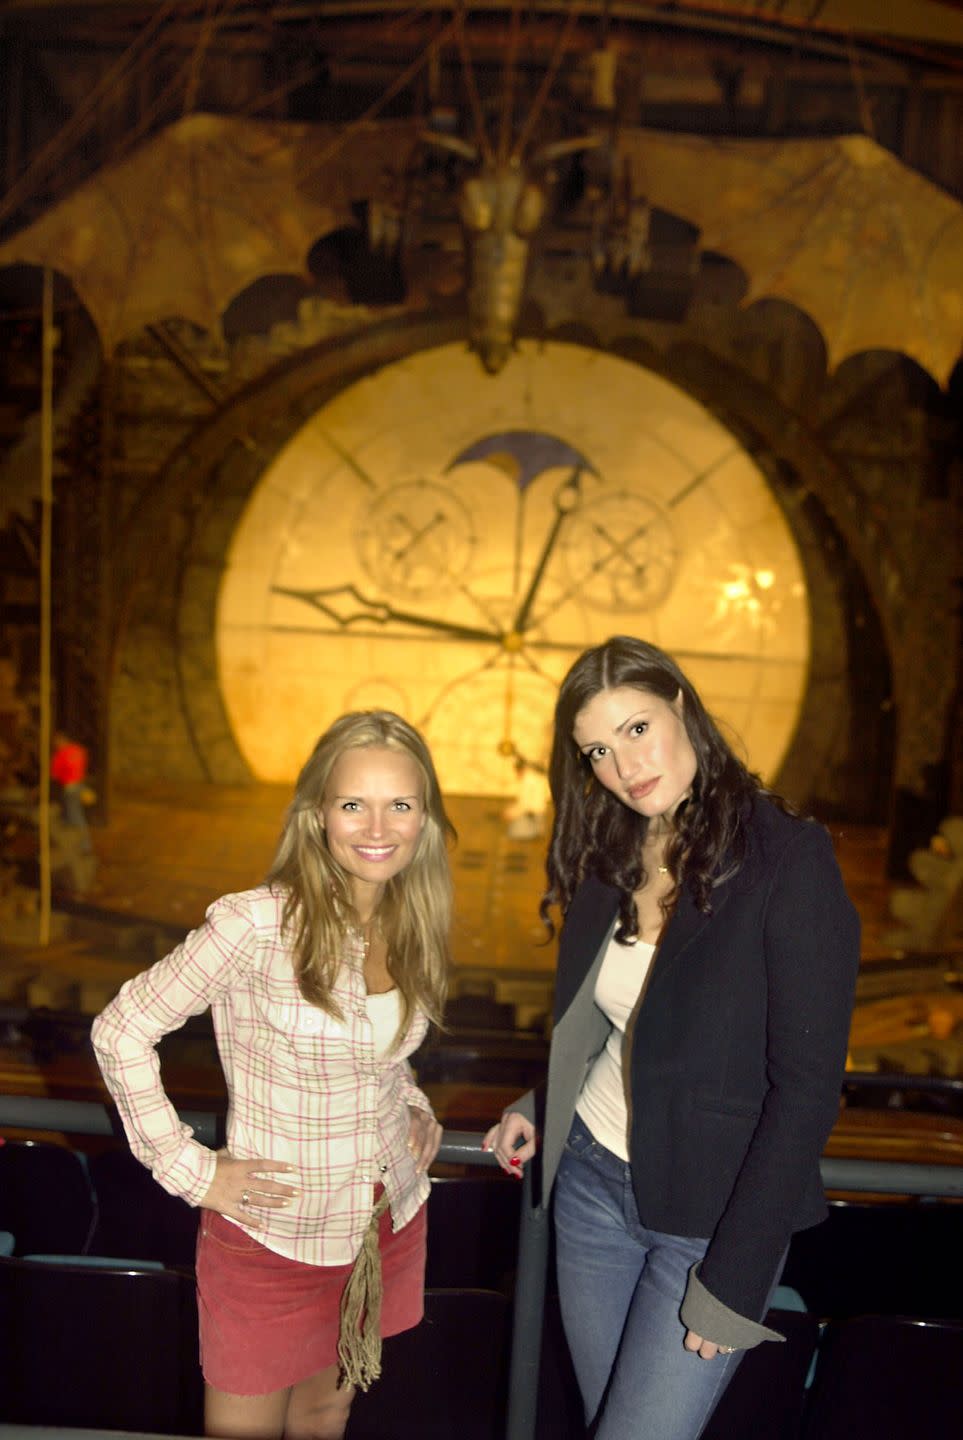 wicked11036lhjpg wicked the new wizard of oz musical will be starting at the curran theater at left is kristin chenoweth, playing glinda, and at right is idina menzel, playing elphaba shot on 5603 in san francisco liz hafa